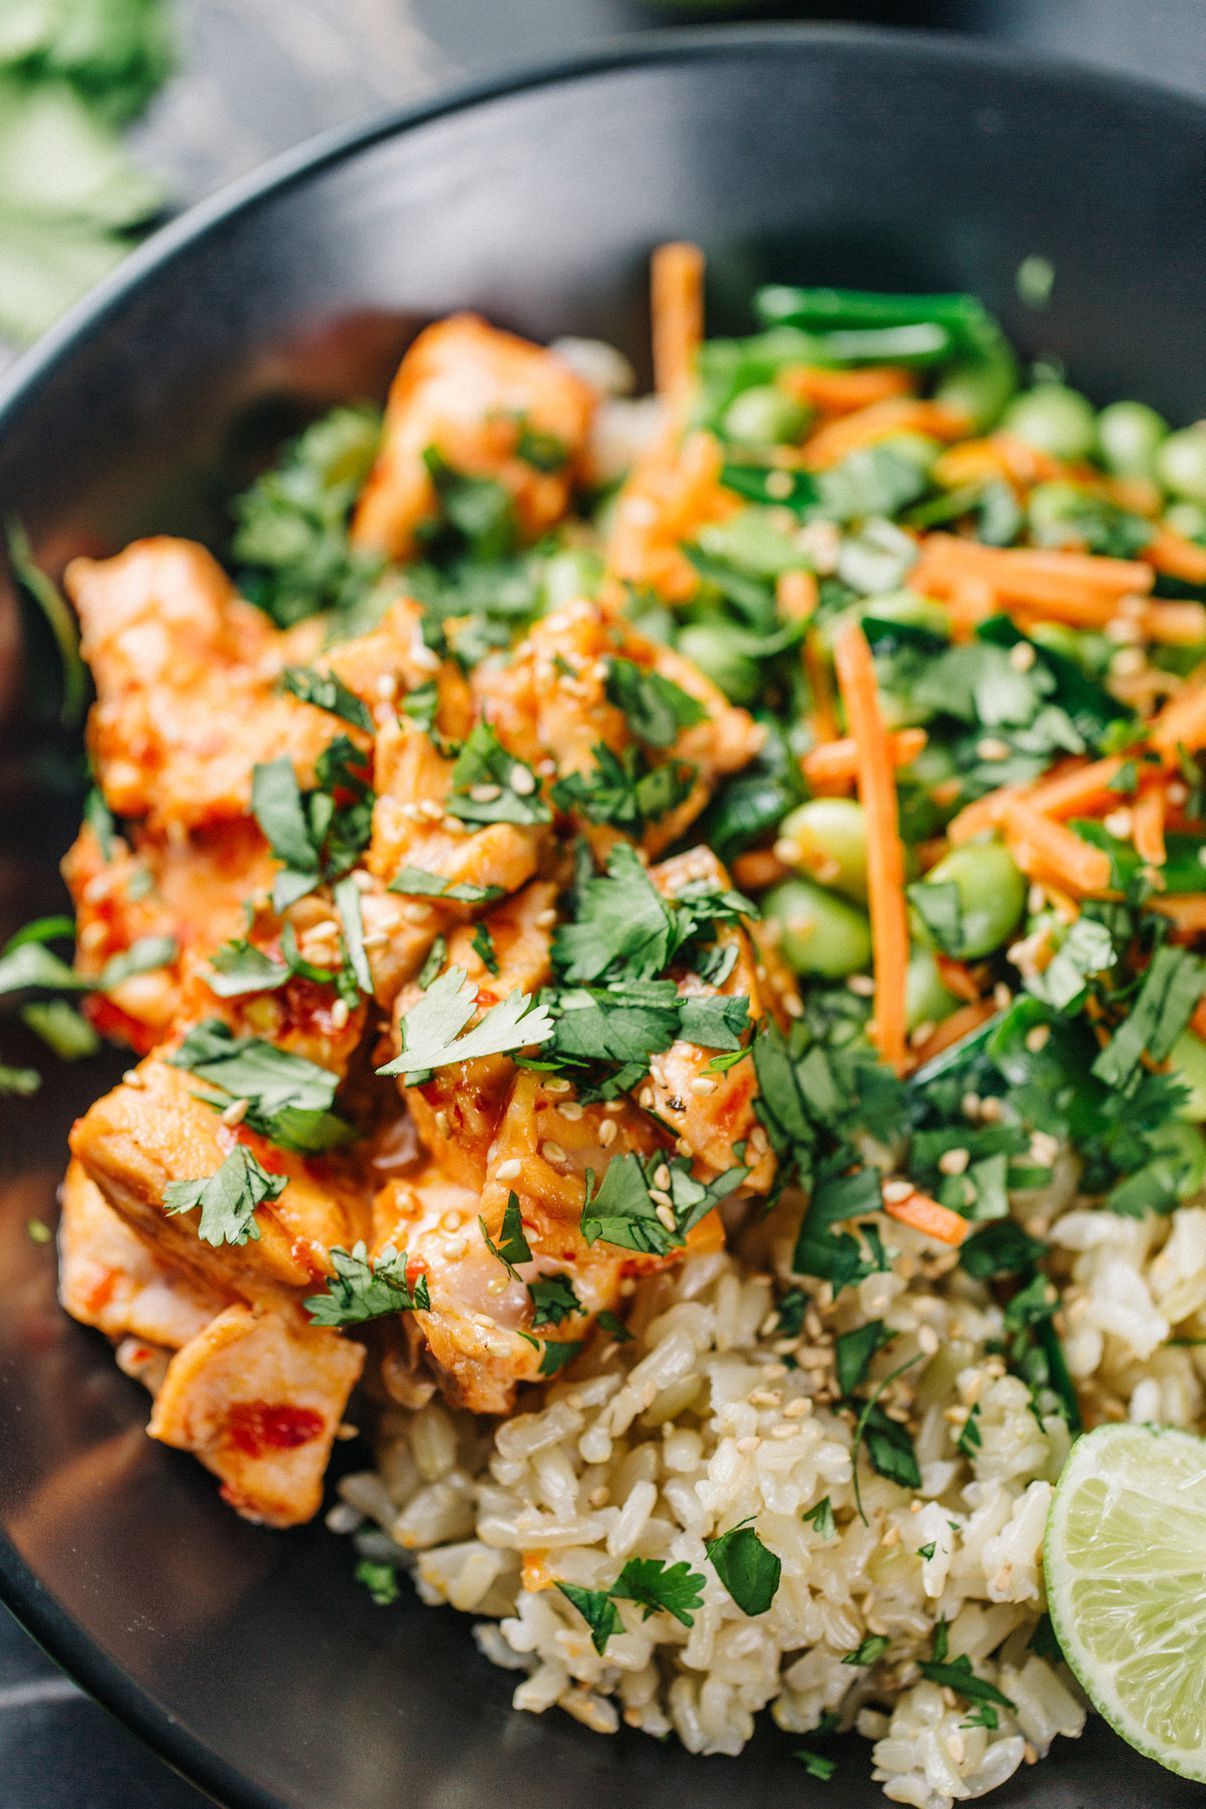 25 Rice Bowl Recipes That Make Cooking Dinner Almost Too Easy -   13 healthy recipes Rice quinoa ideas